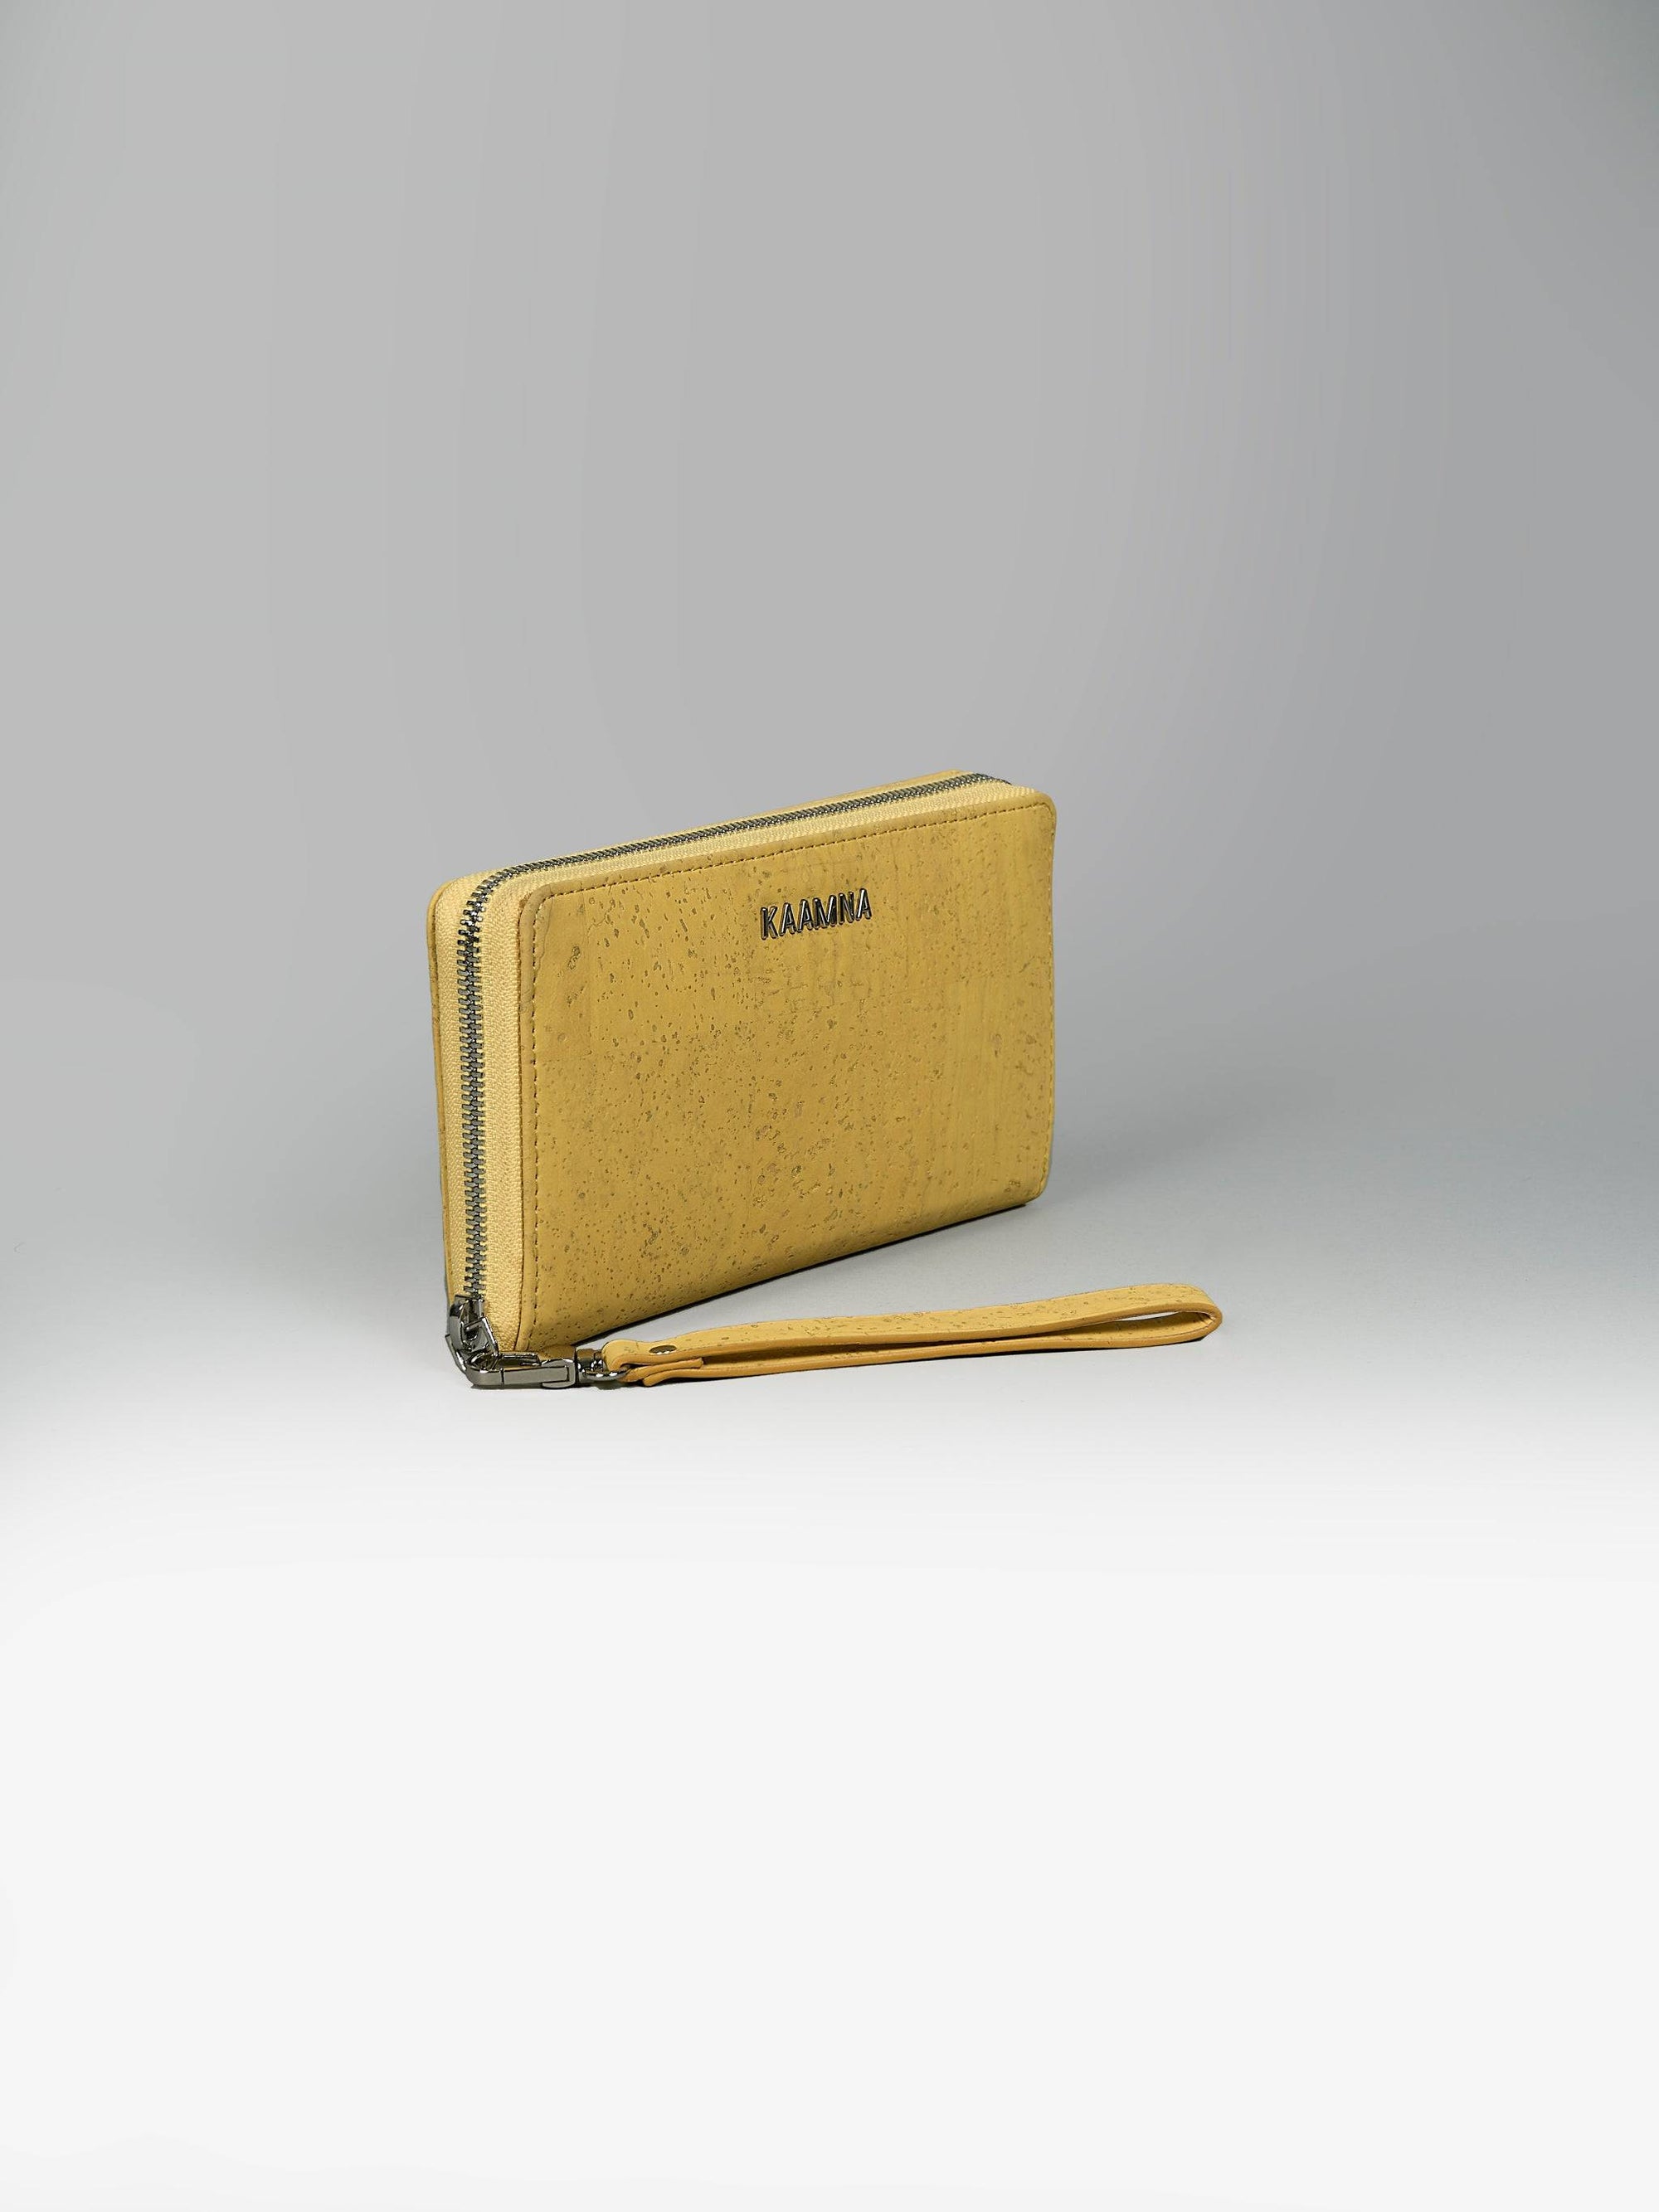 Cork Here & There Wallet -  KAAMNA